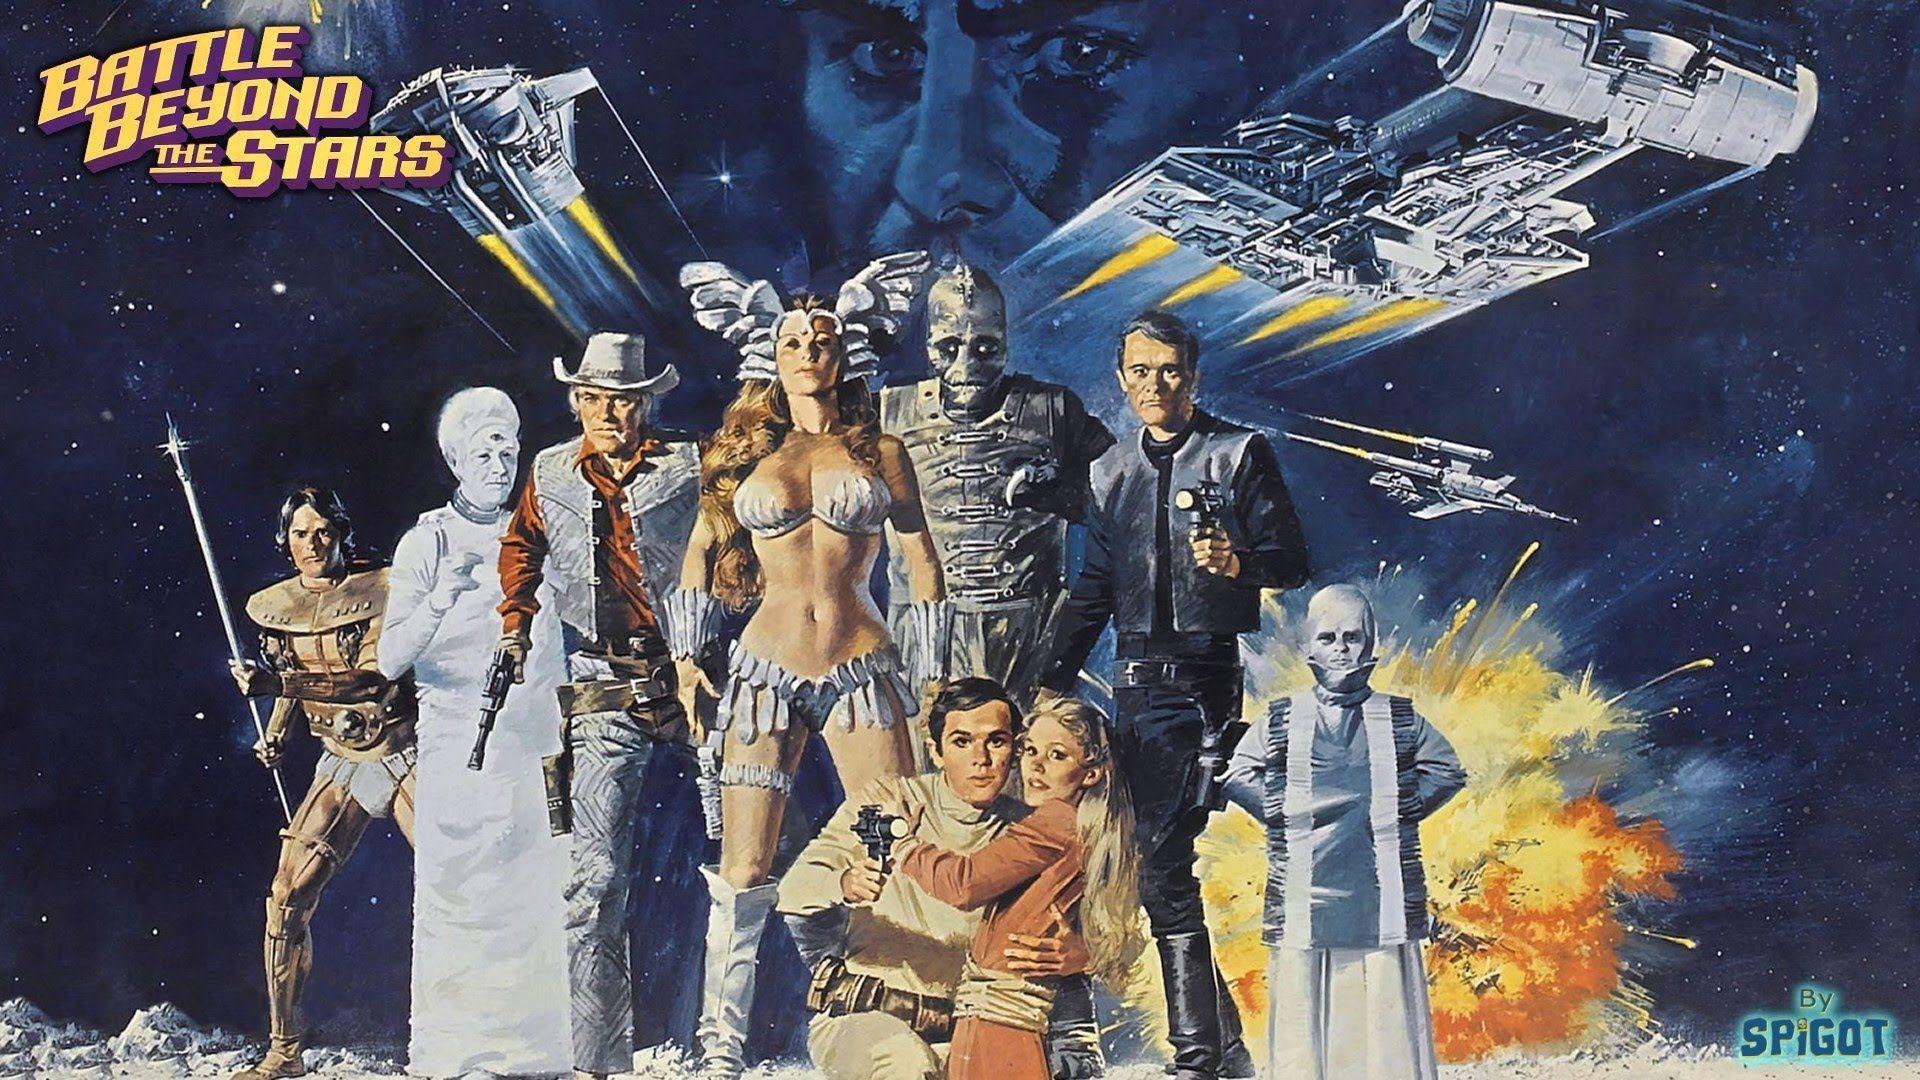 Why We Should Watch Older Movies: How The 1980s Sci Fi Film BATTLE